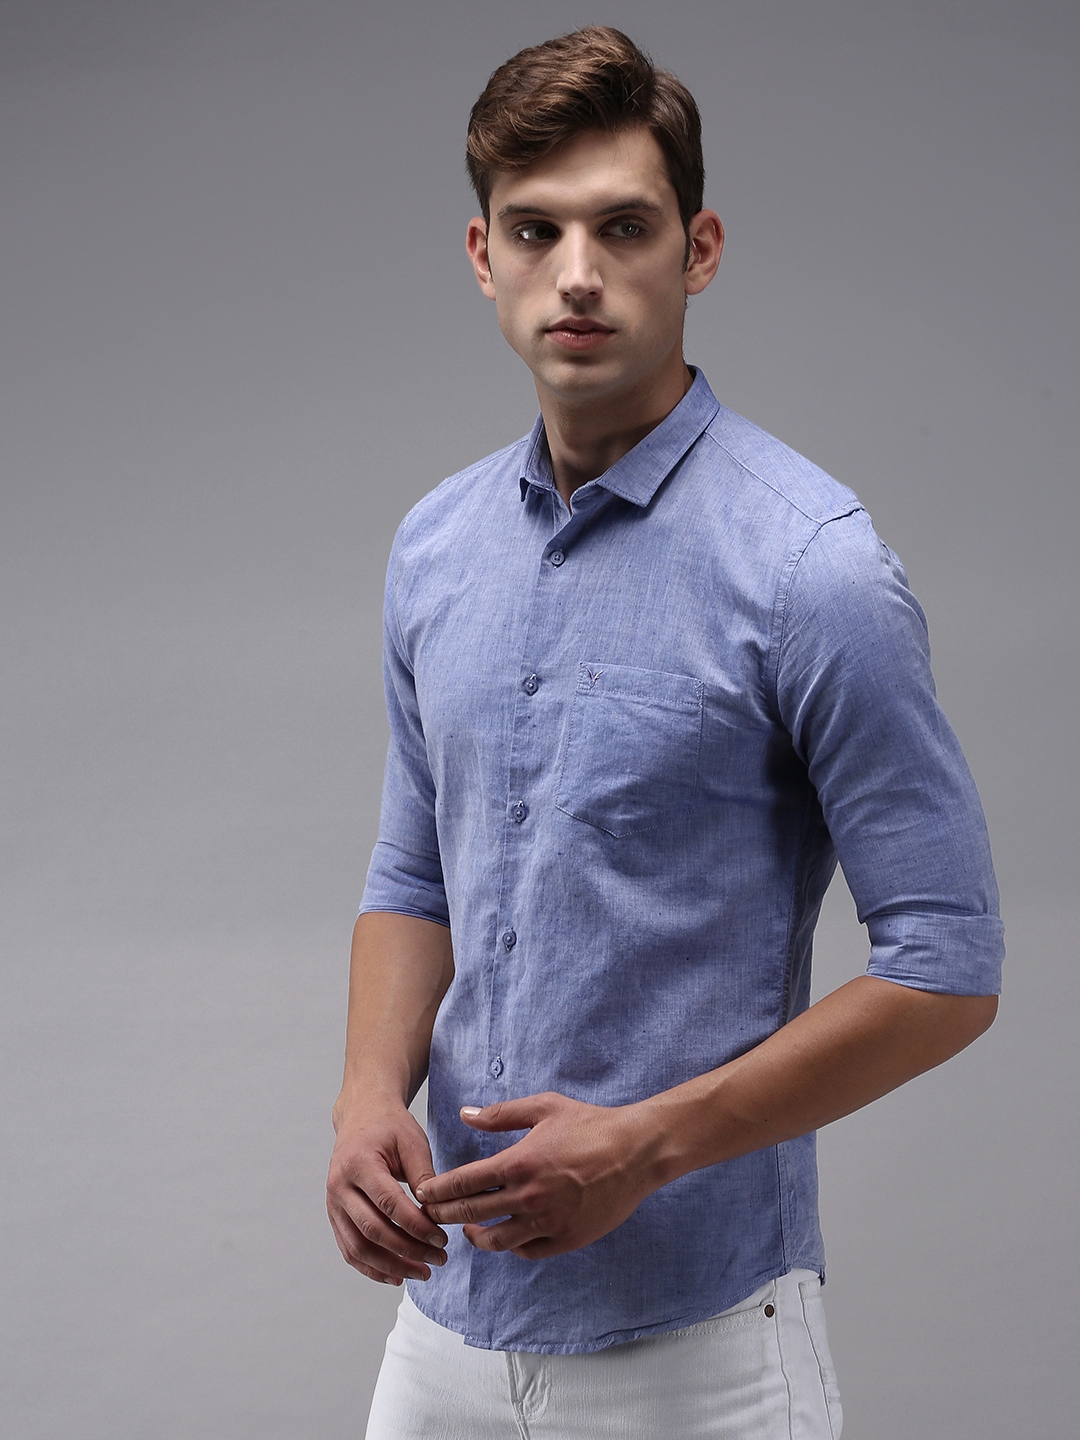 Men's Blue Cotton Solid Casual Shirts